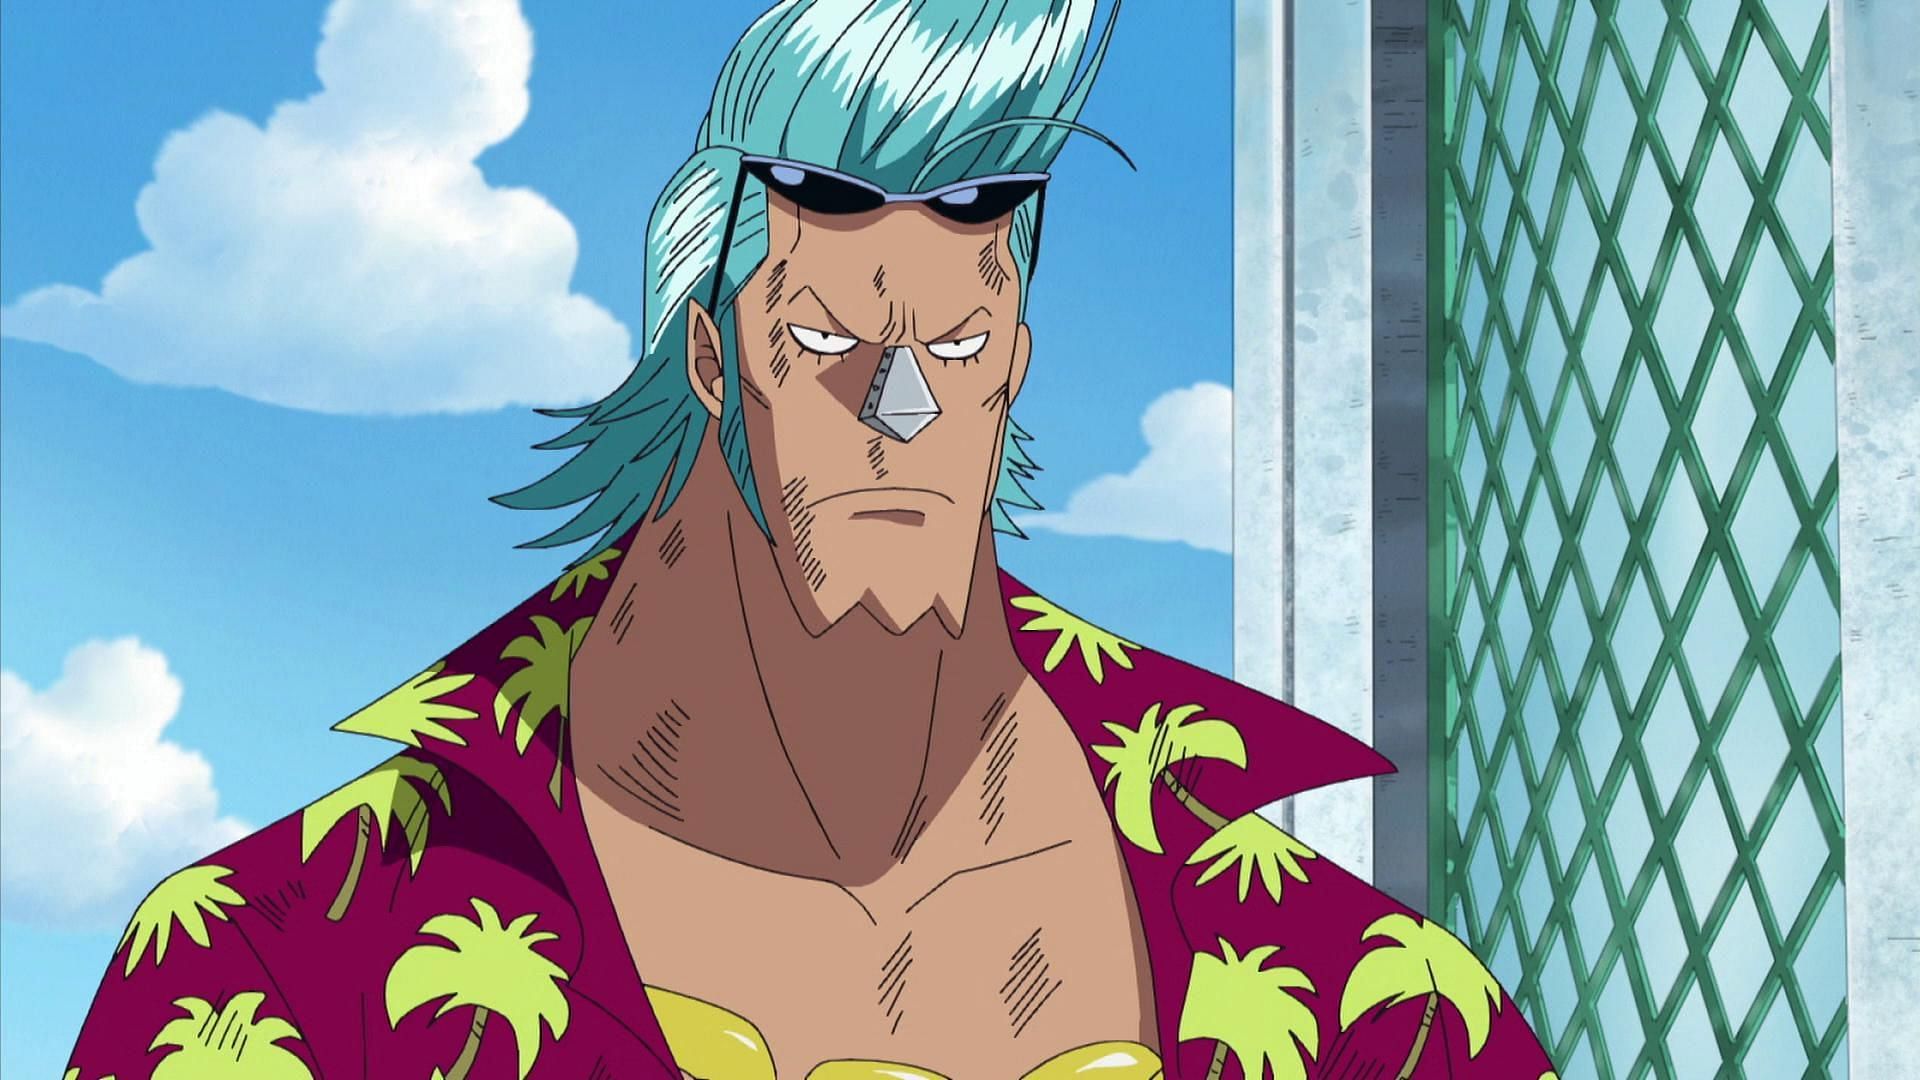 Franky as seen in One Piece before the timeskip (Image via Toei Animation)